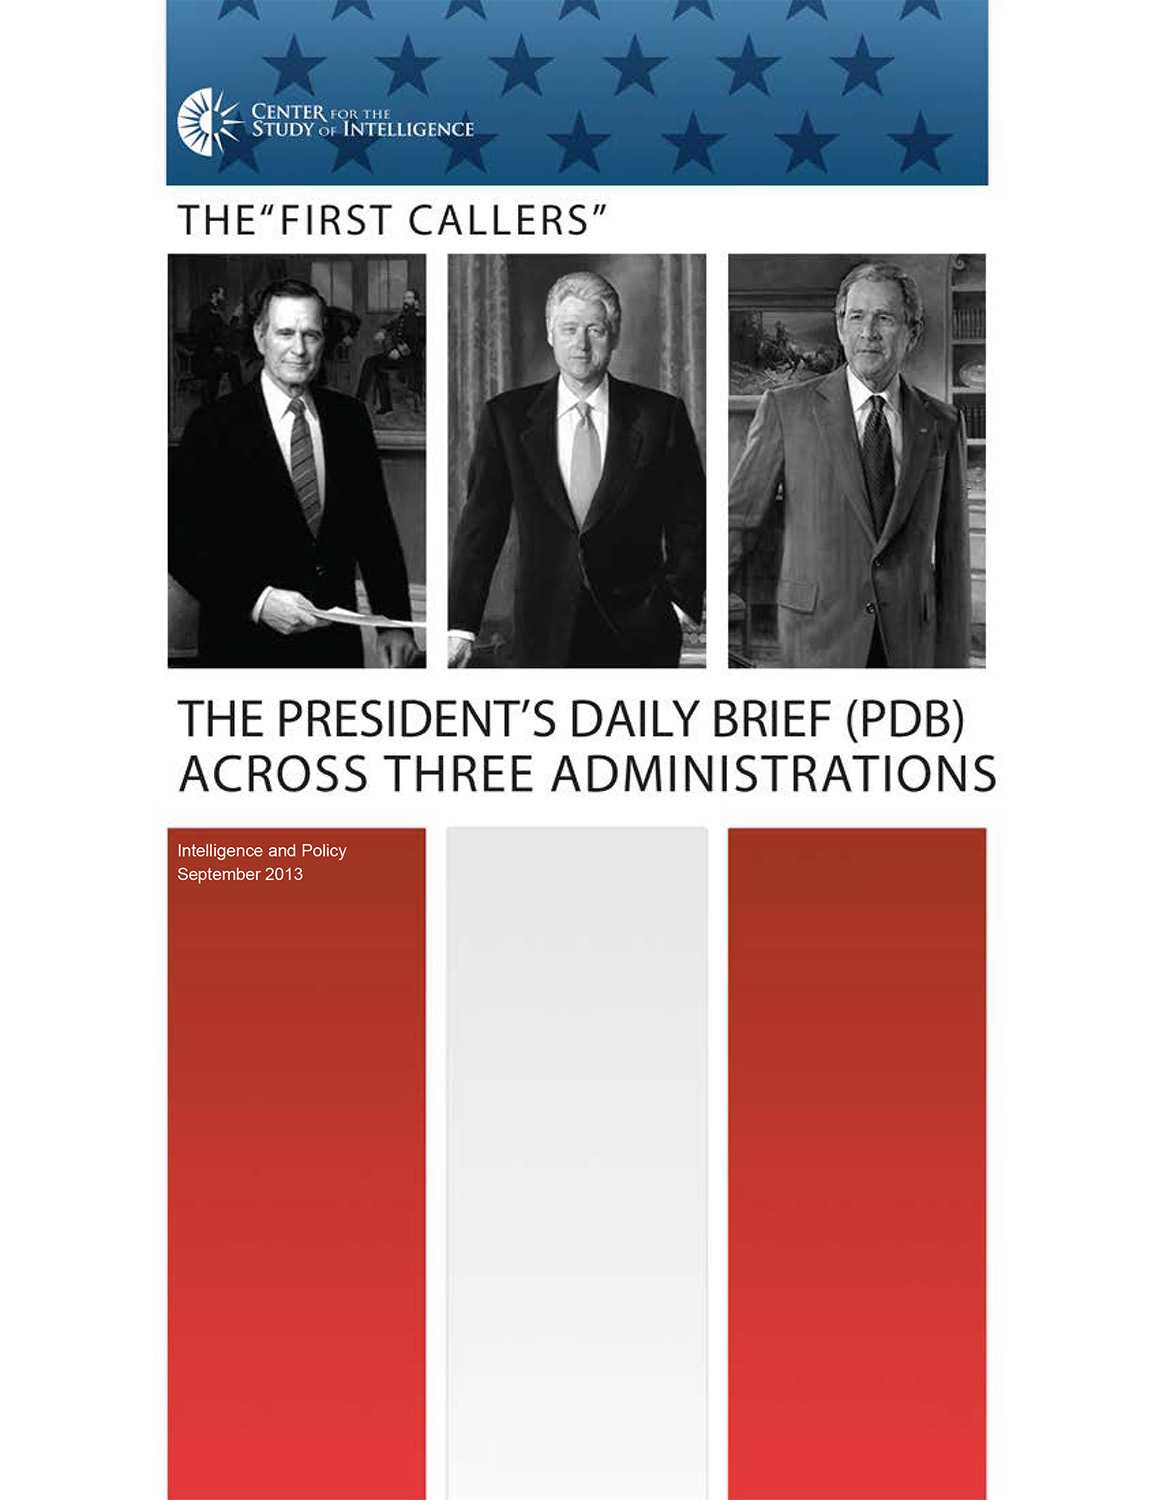 Red, white, and blue cover of the publication titled "The President's Daily Brief Across Three Administrations."